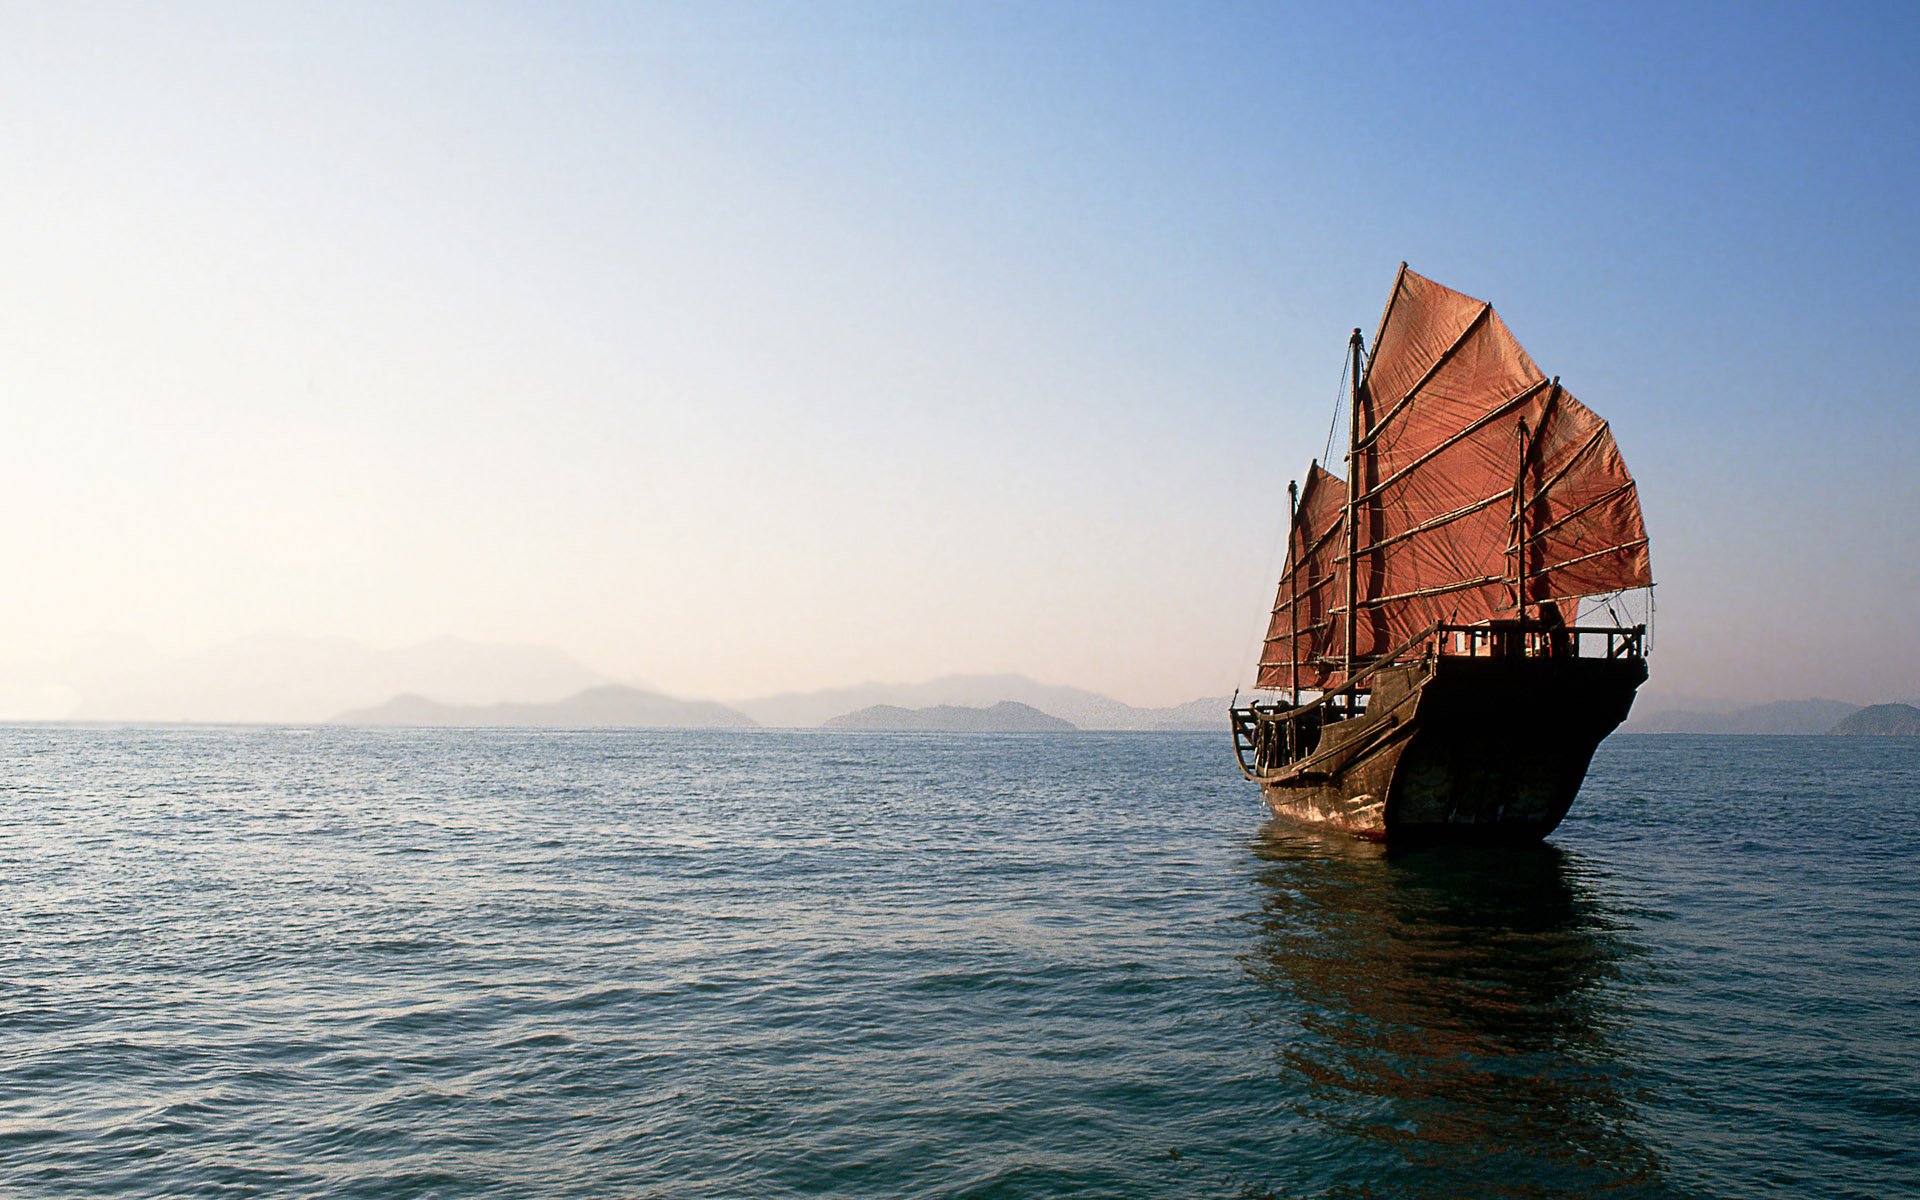 The ancient Chinese ship wallpapers and images   wallpapers pictures